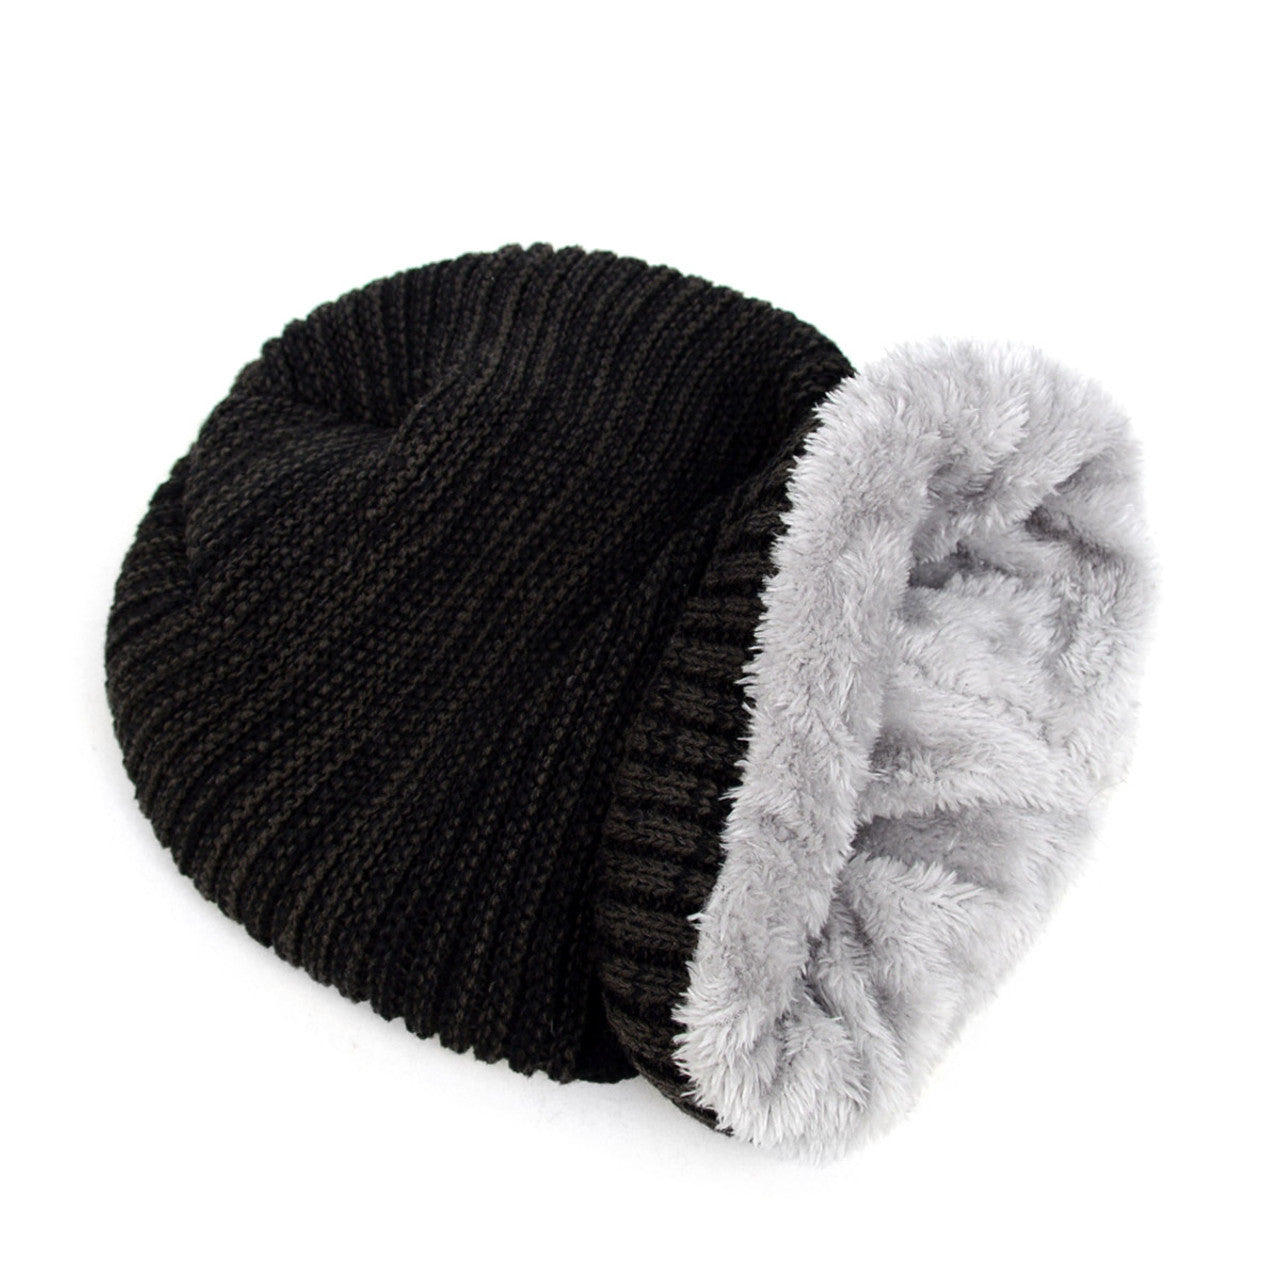 Slouchy Oversized Baggy Winter Beanie Hat Manitoba - Hue fra FOEMO hos The Prince Webshop